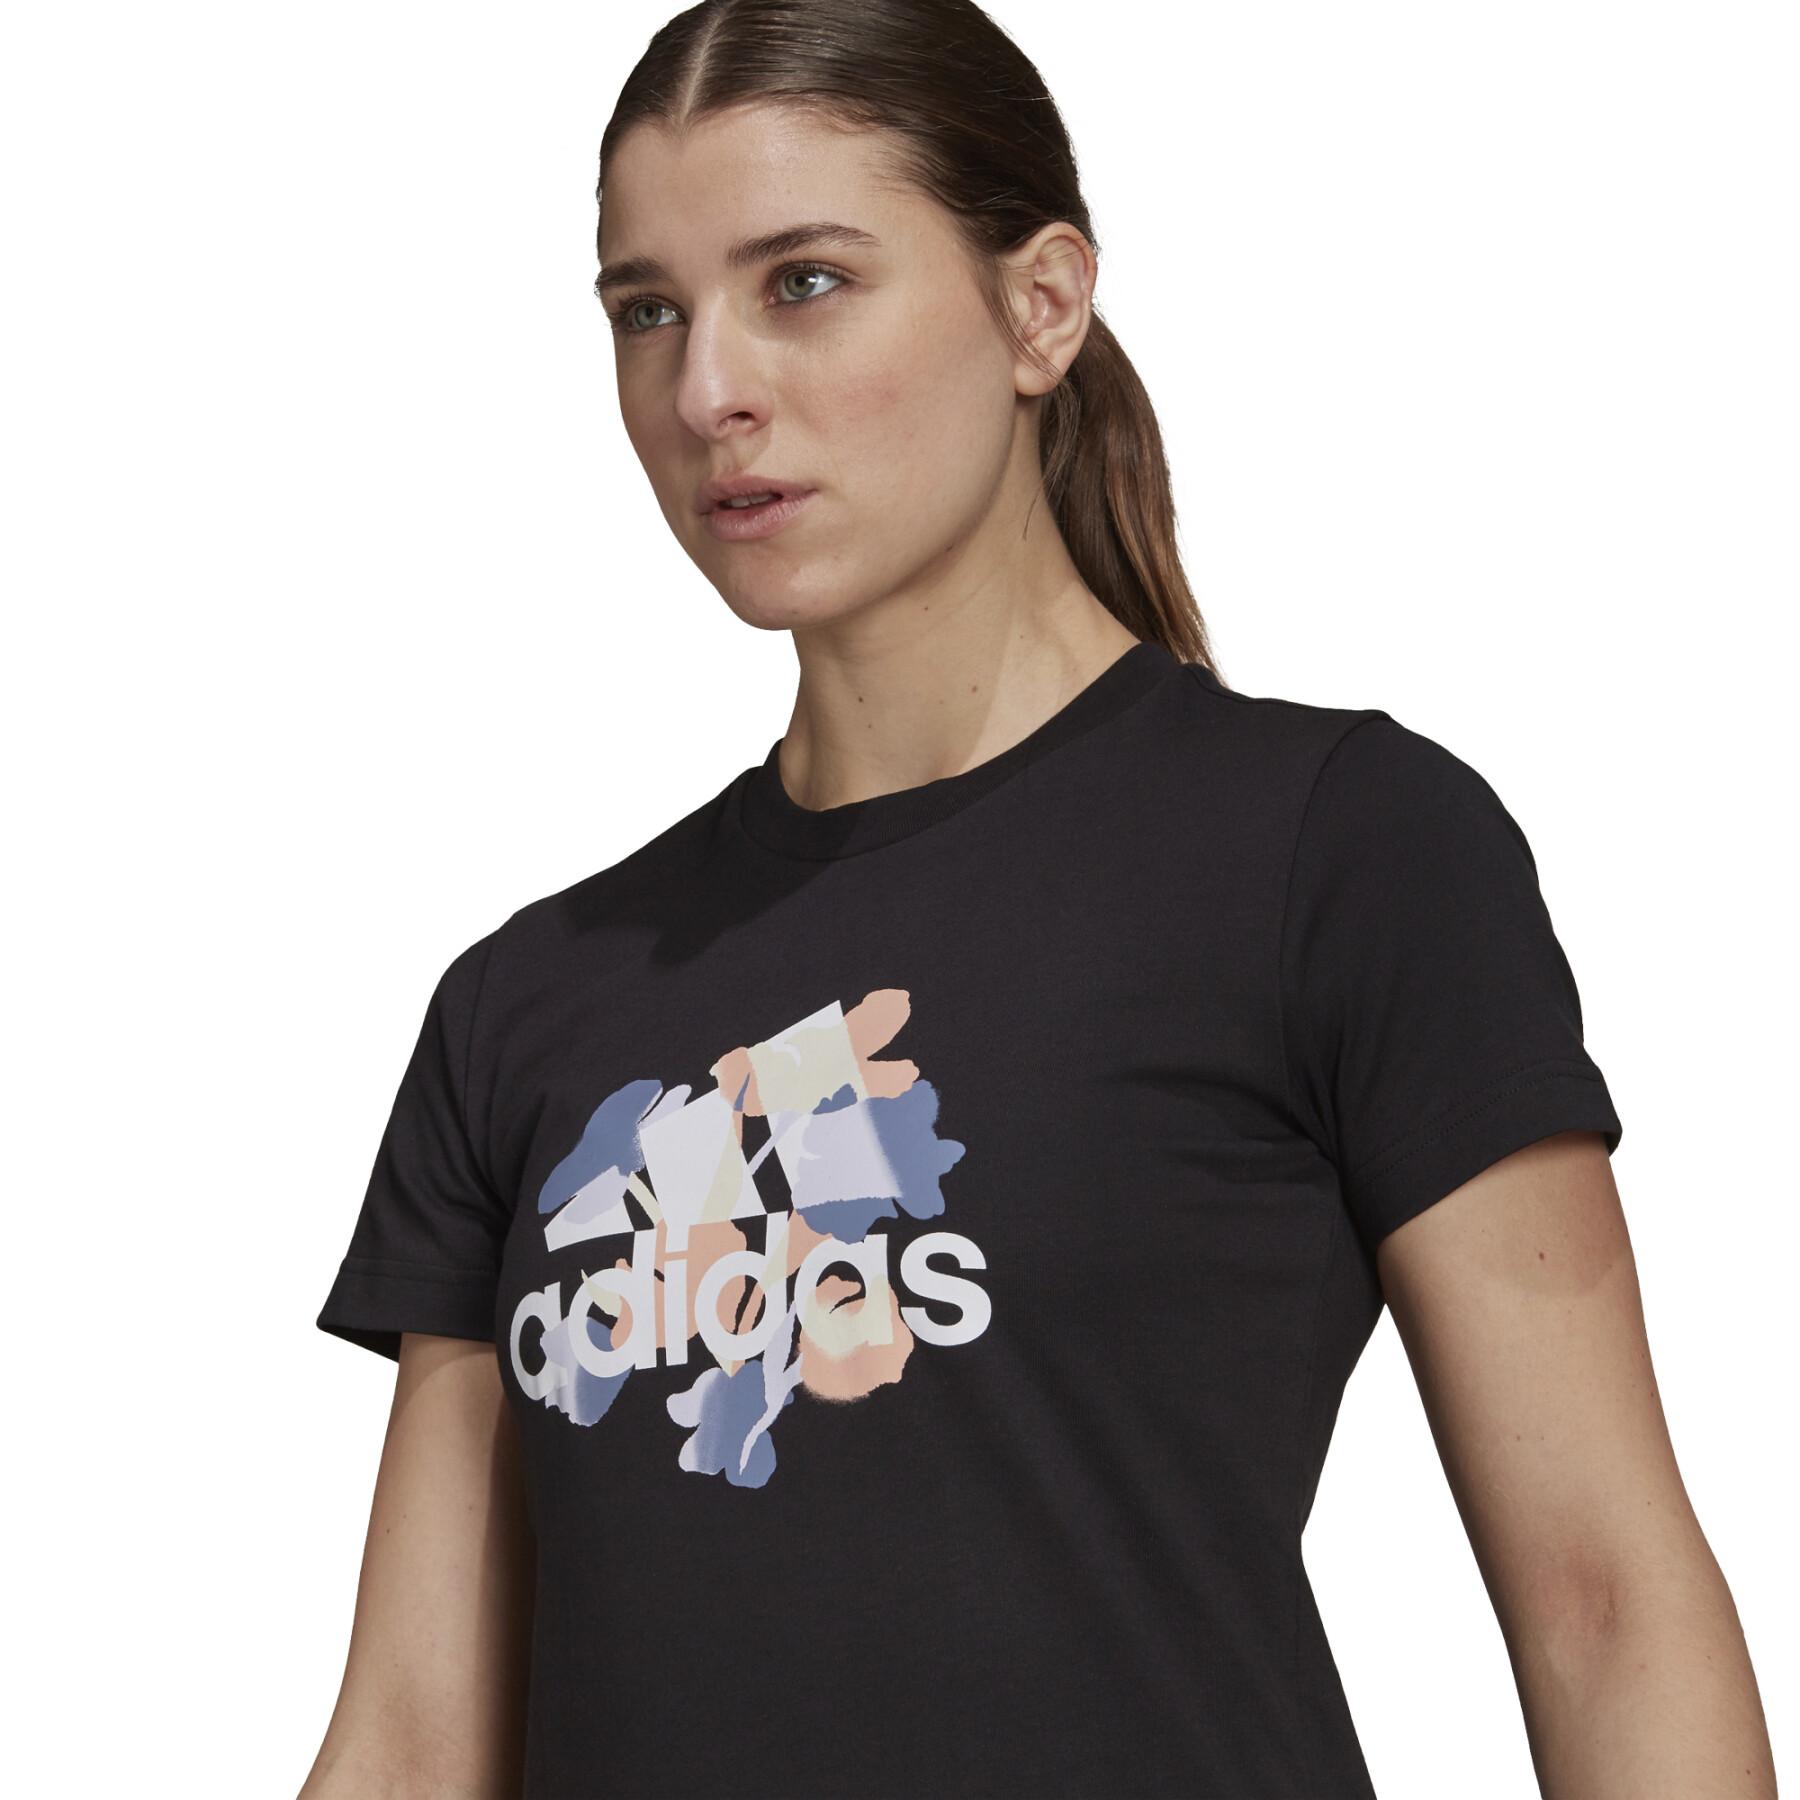 Women's T-shirt adidas Floral Graphic